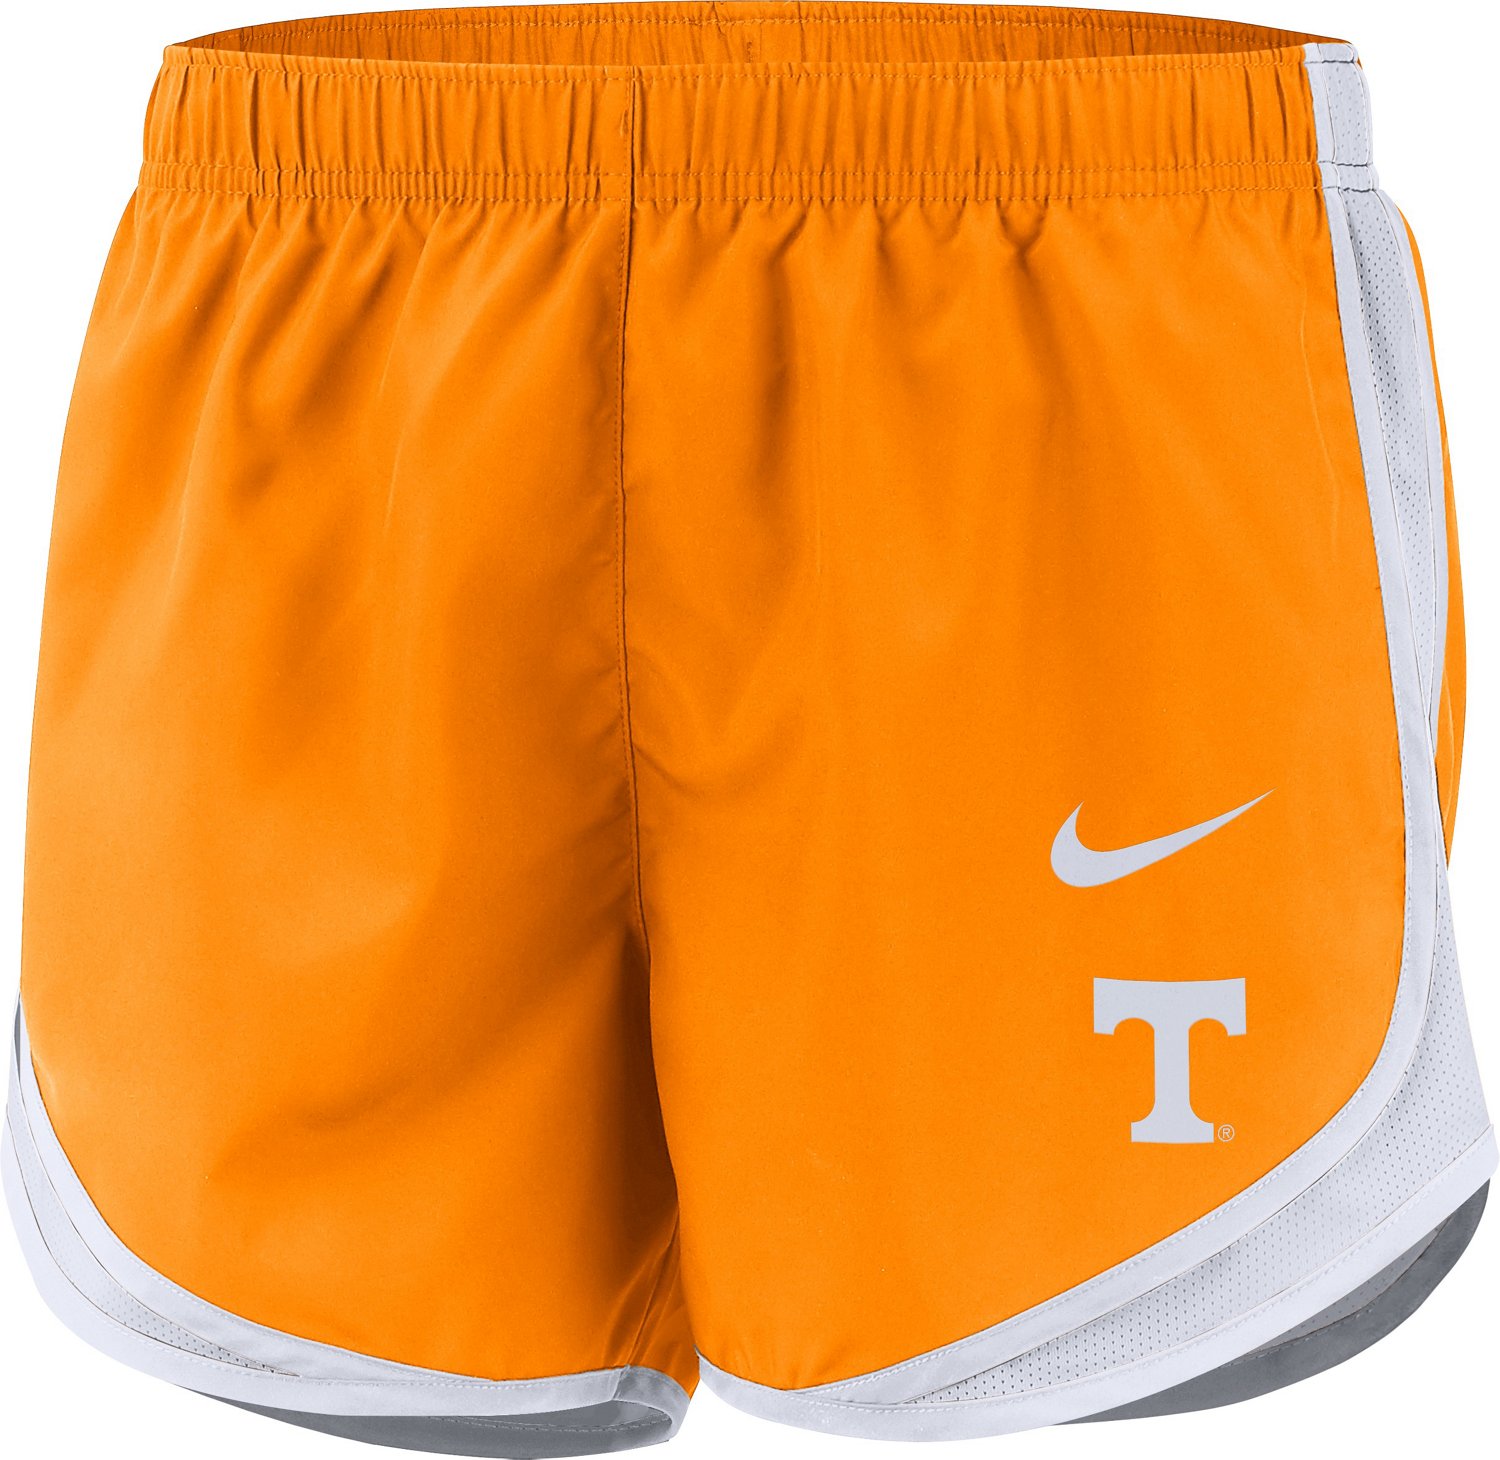 Forbyde konkurrenter Globus Nike Women's University of Tennessee Tempo Shorts | Academy